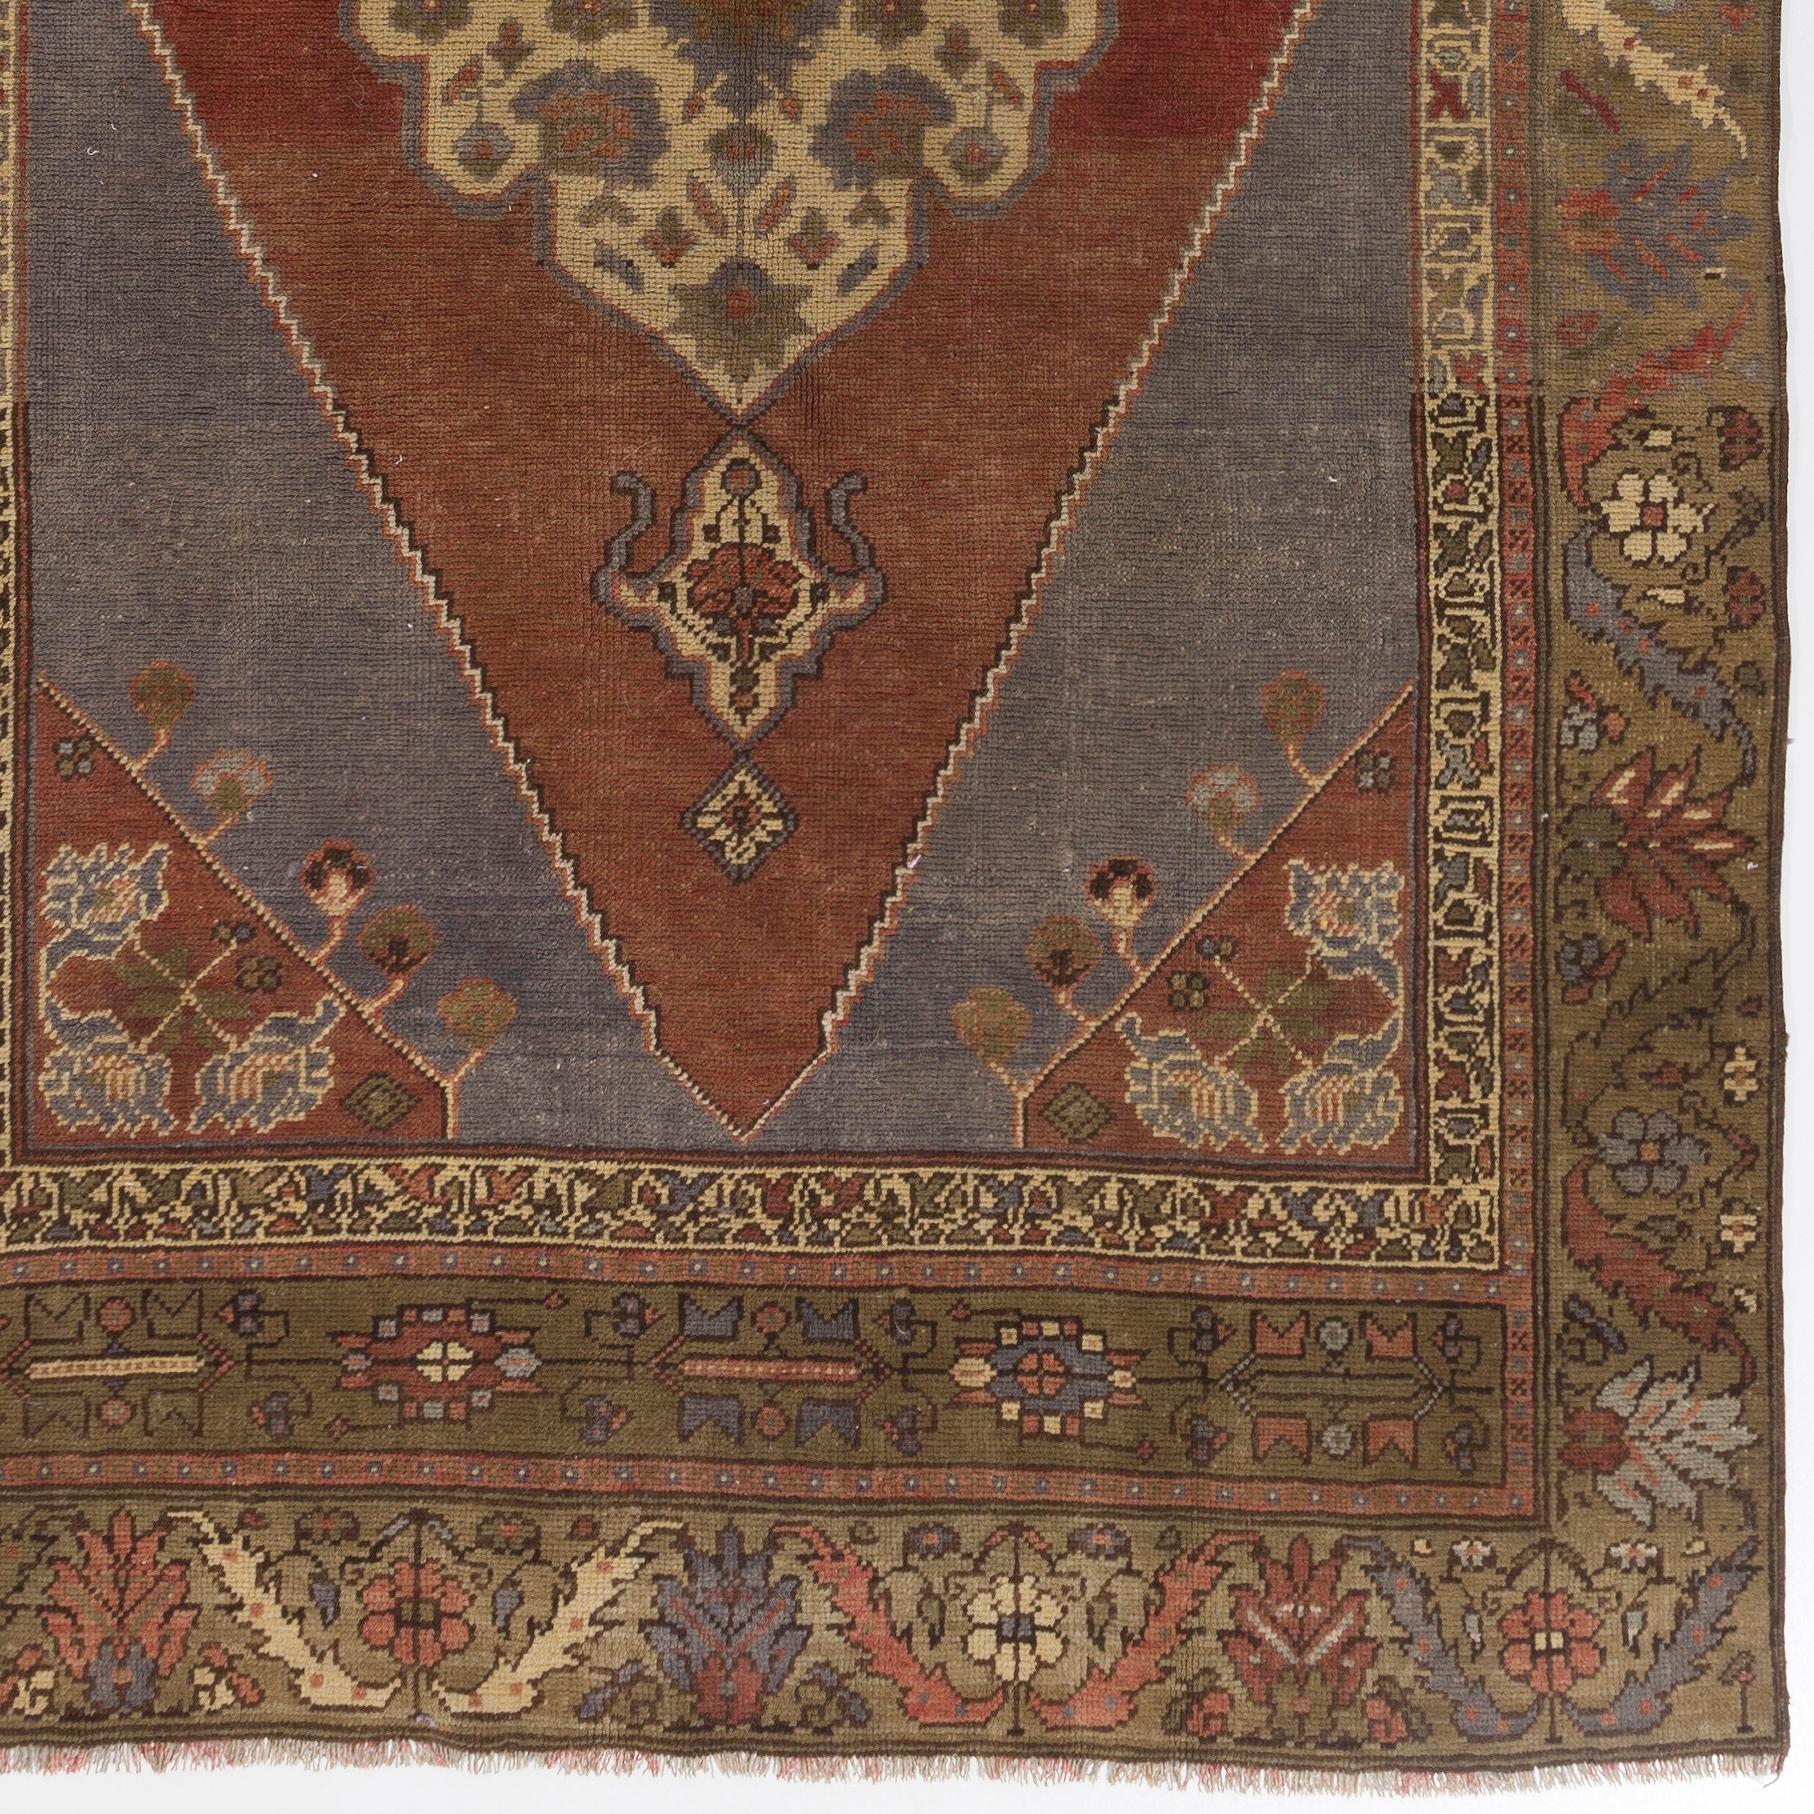 Hand-Knotted 5x9.4 Ft Handmade Turkish Village Rug. One of Kind Oriental Carpet, All Wool For Sale